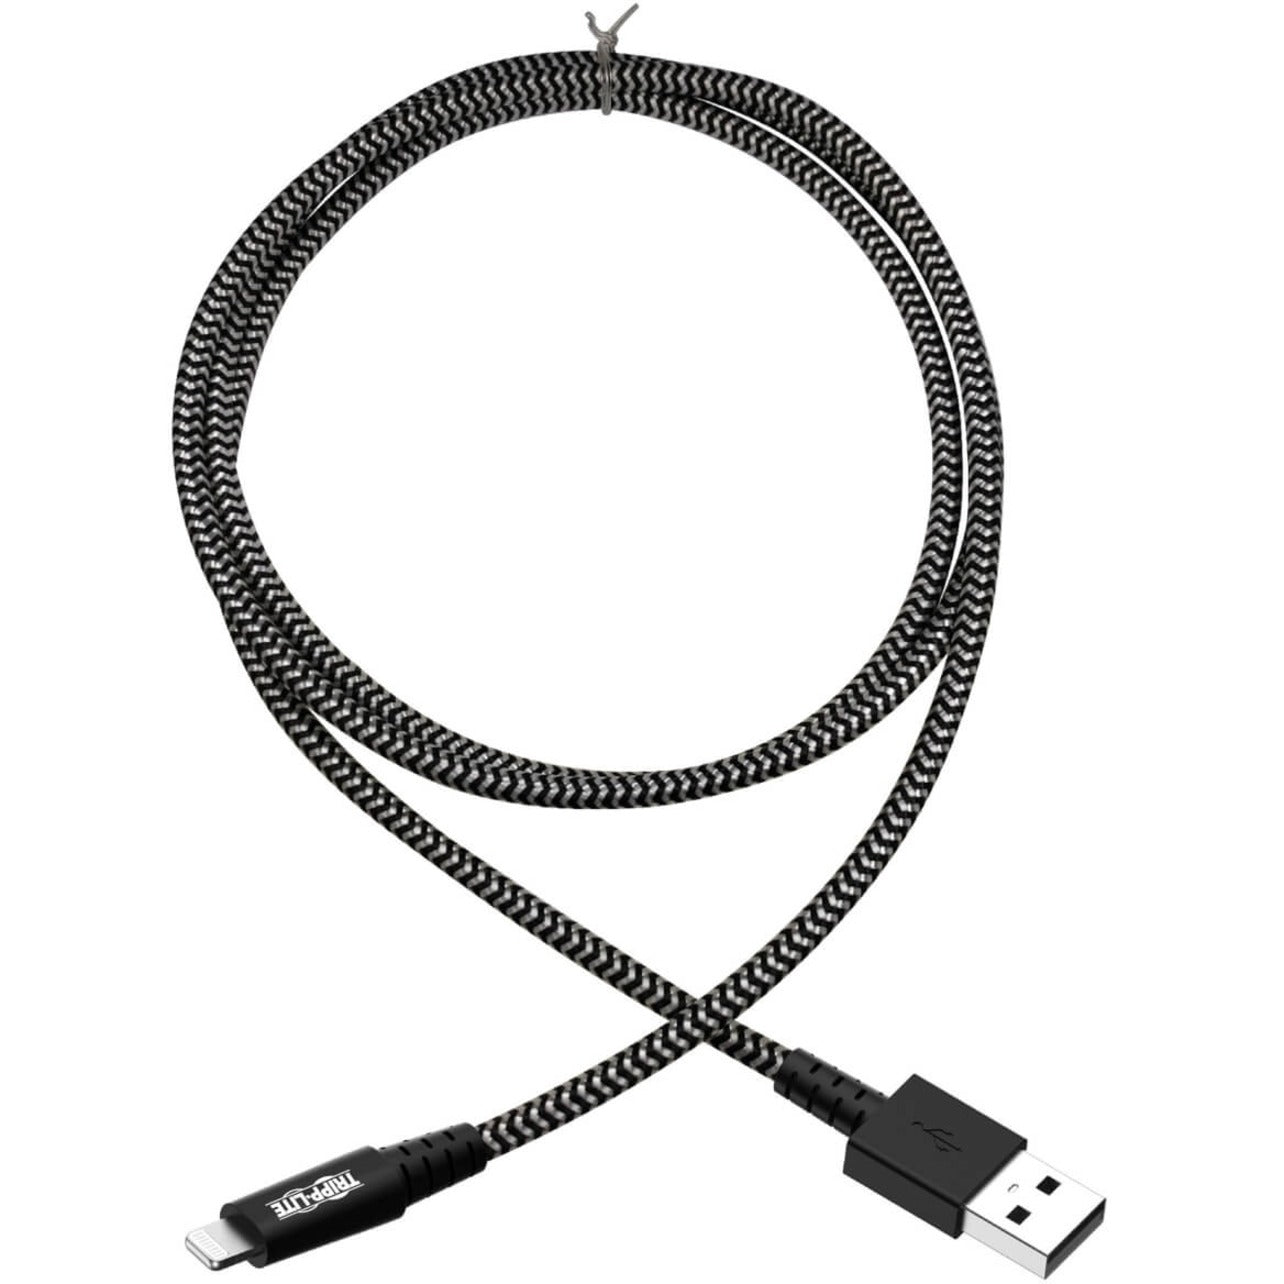 Tripp Lite M100-010-HD Heavy-Duty USB Sync/Charge Cable with Lightning Connector, 10 ft. (3 m)